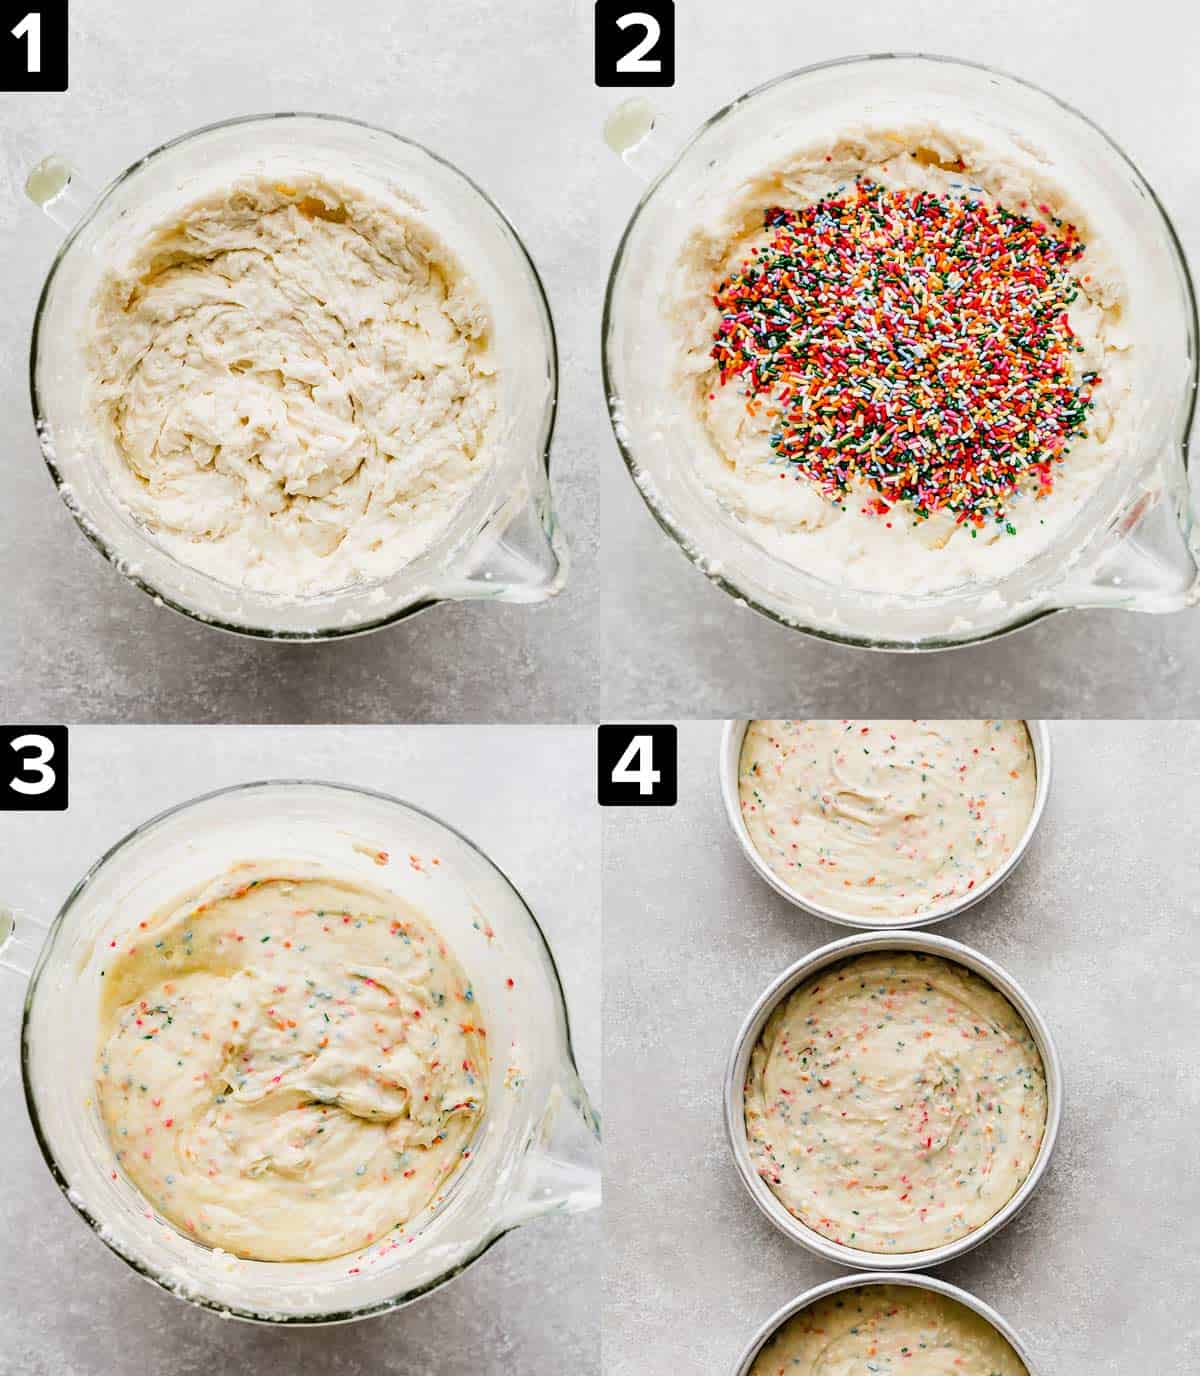 Four images showing how to make homemade funfetti cake batter.